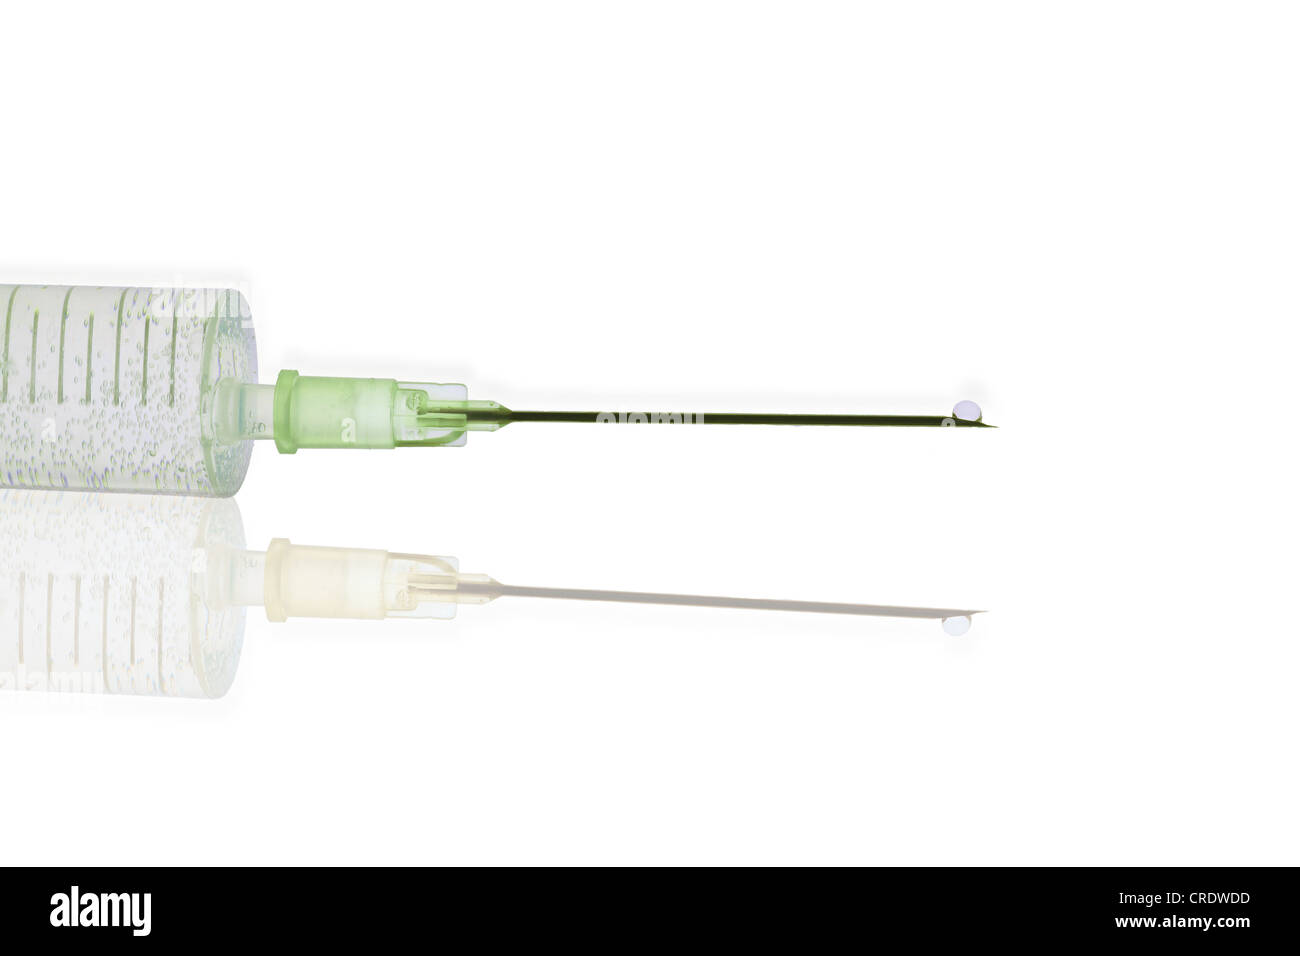 Syringe with a hypodermic needle and a droplet Stock Photo